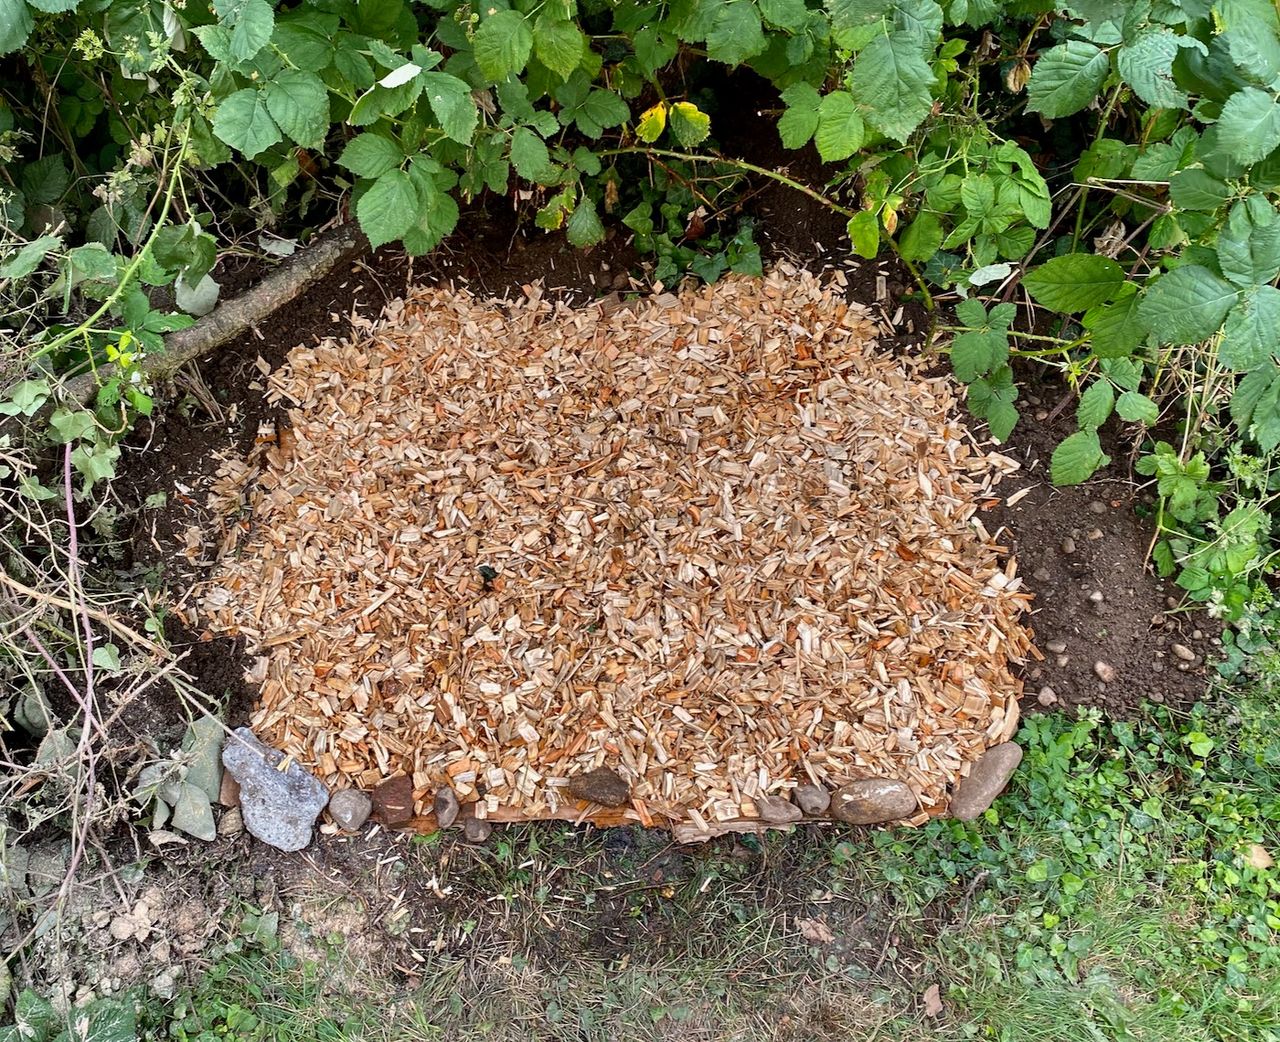 The hole in the ground is totally covered with fresh wood chips, such that nothing else is visible except for the very corners of cardboard.